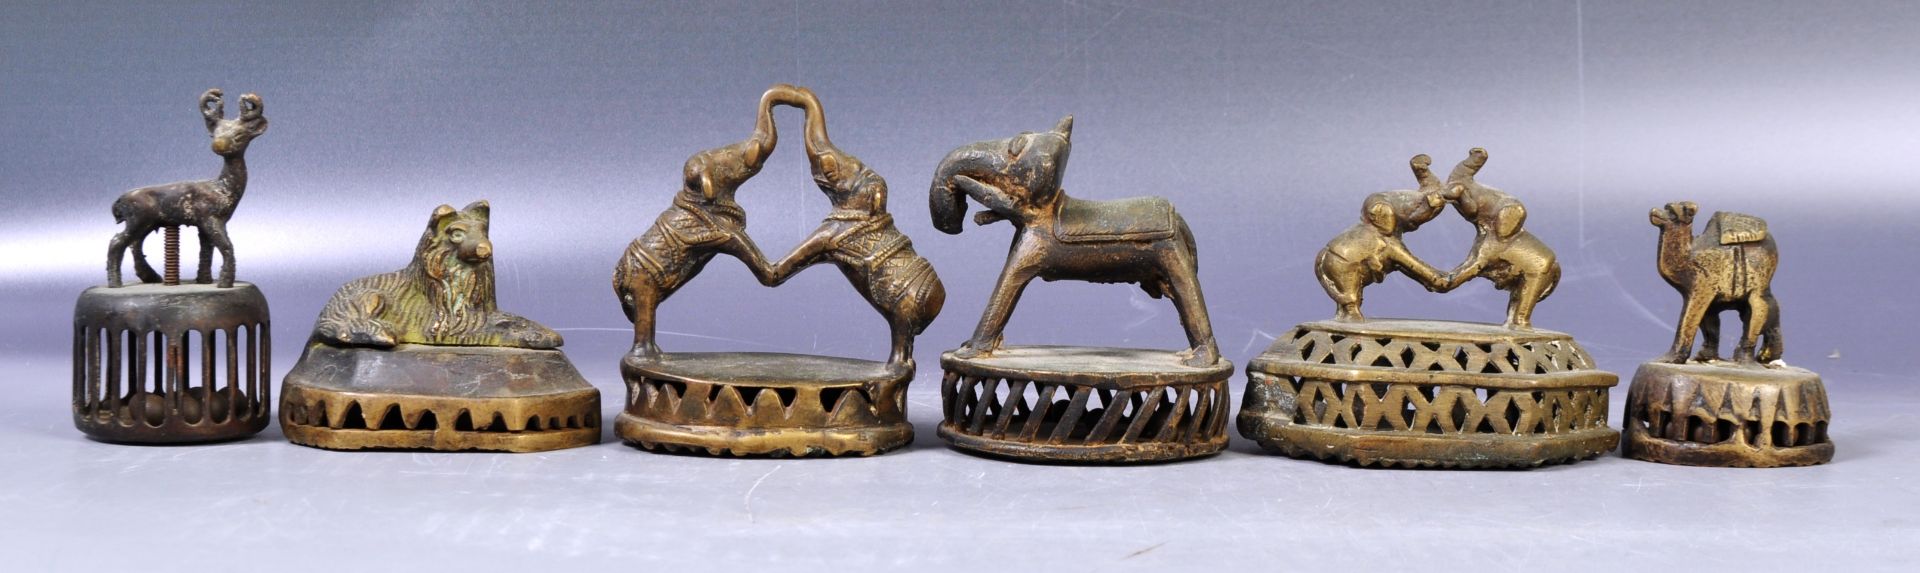 COLLECTION OF SIX INDIAN ANTIQUE FOOT SCRAPERS / SCRUBBERS